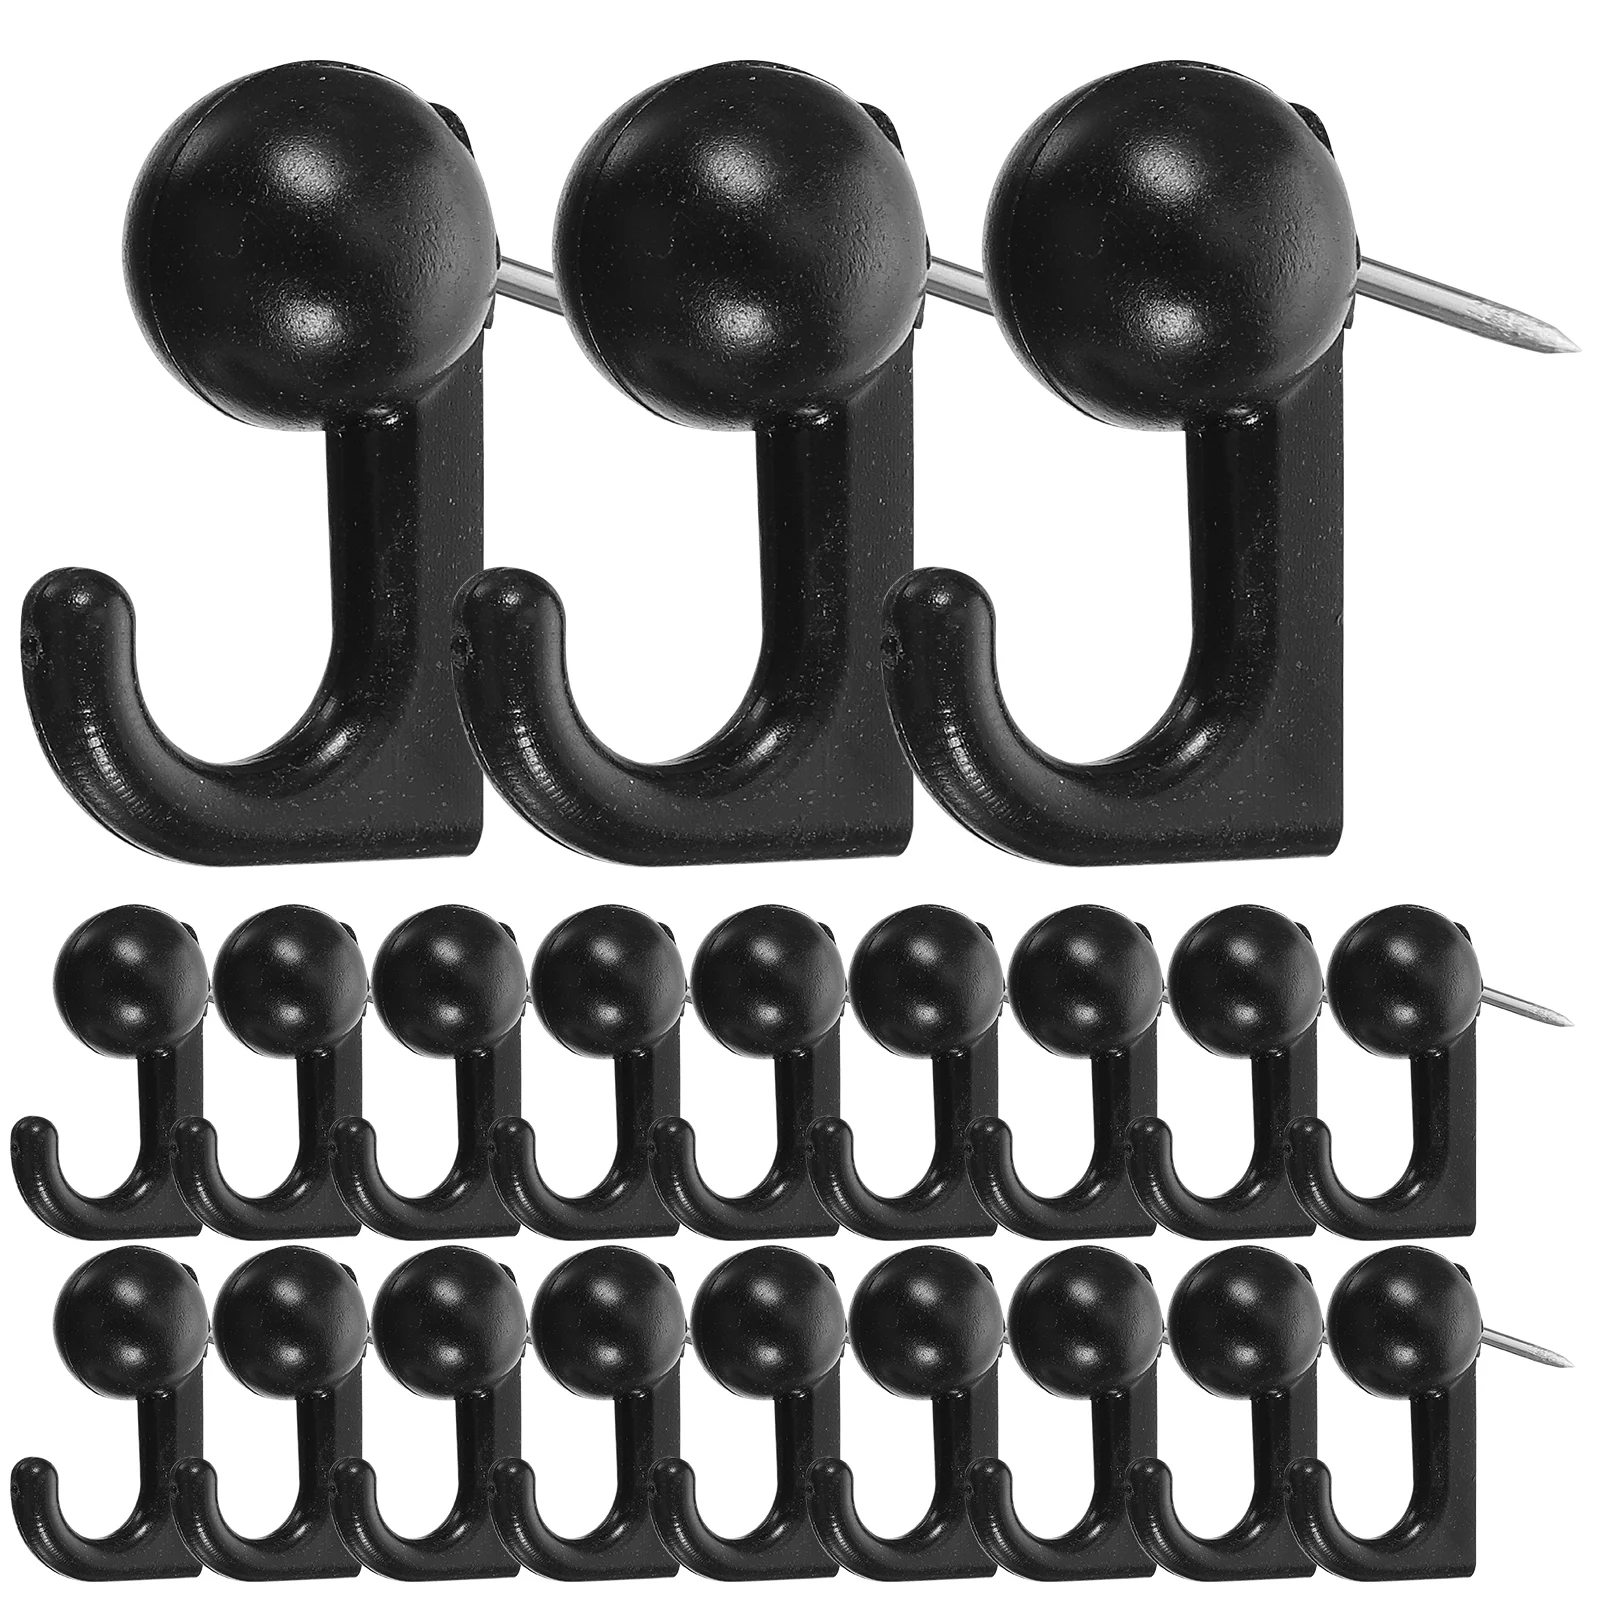 

50 Pcs Push Pin Hanger Pins Tacks for Wall Hangings Thumb with Hook Cork Board Picture Hooks Plastic